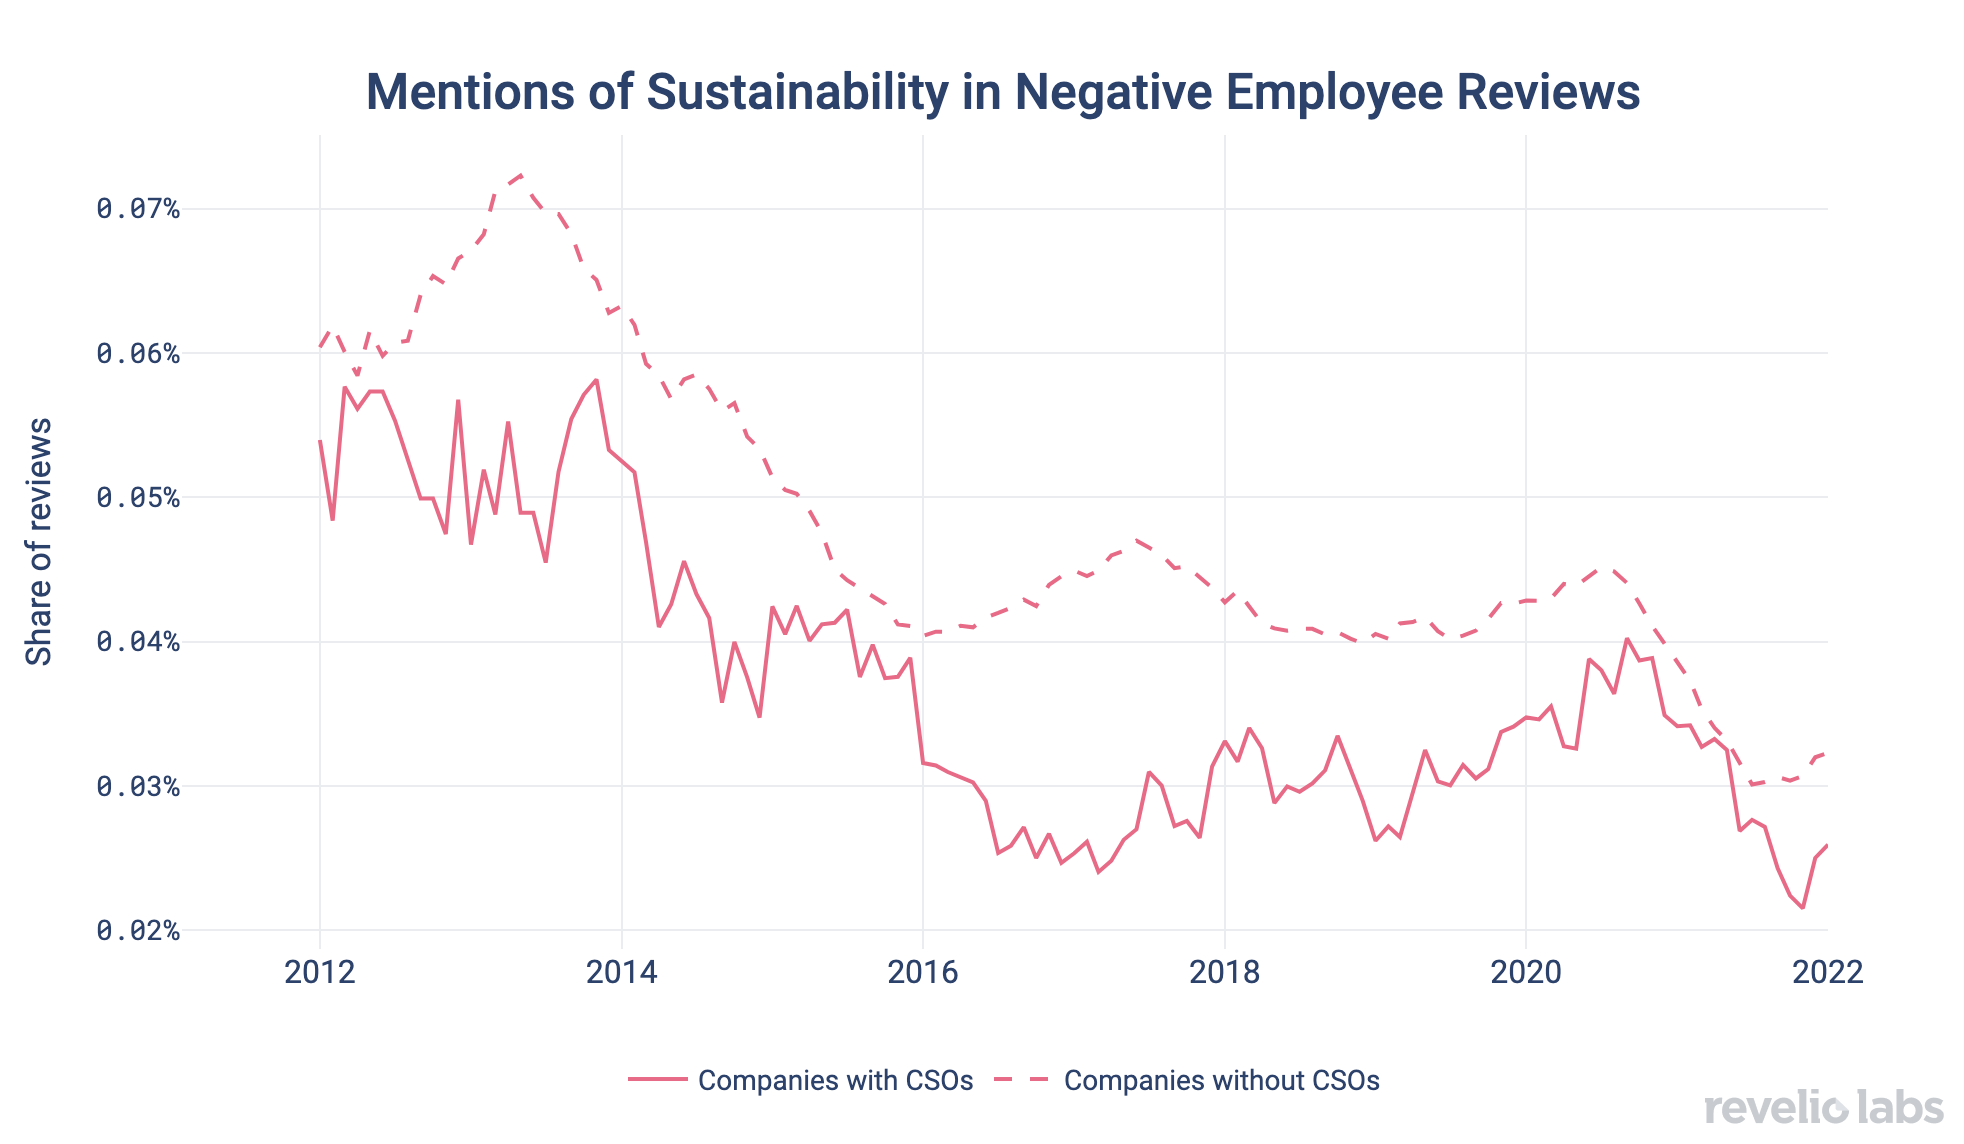 Mentions of Sustainability in Negative Employee Reviews